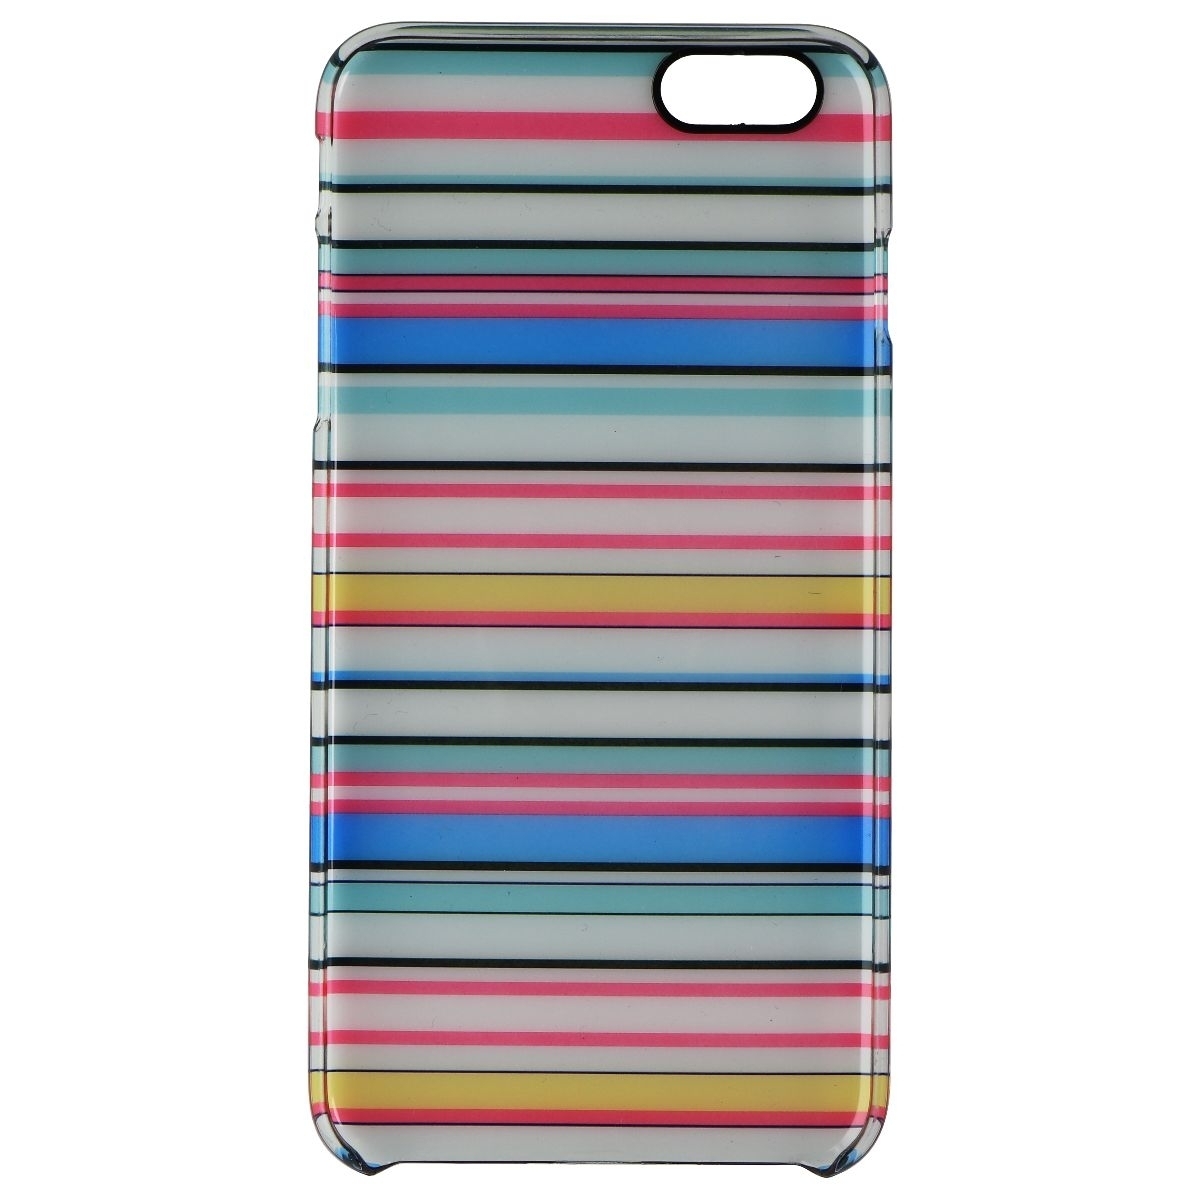 Uncommon Hardshell Case For Apple IPhone 6s Plus/6 Plus - Multi Stripe/Clear (Refurbished)